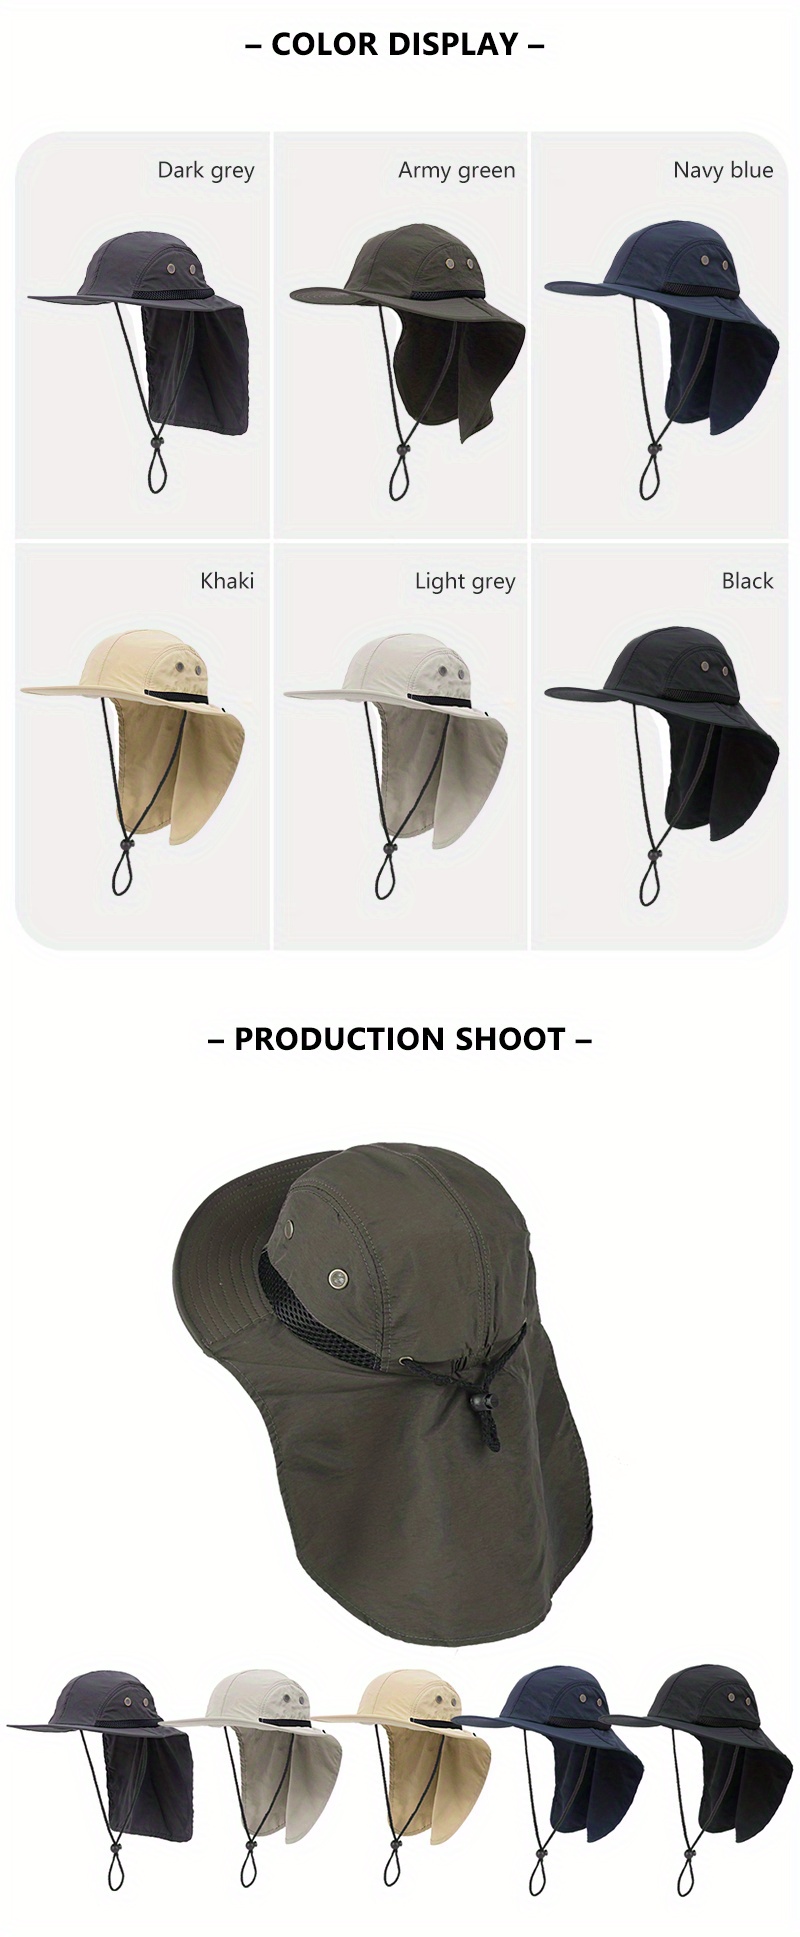 Premium Outdoor Sun Hat With Neck Flap Wide Brim Adjustable Chin Strap For Fishing  Hiking Safari Travel Summer Sun Protection Upf 50 Breathable Packable Flap  Hat For Camping